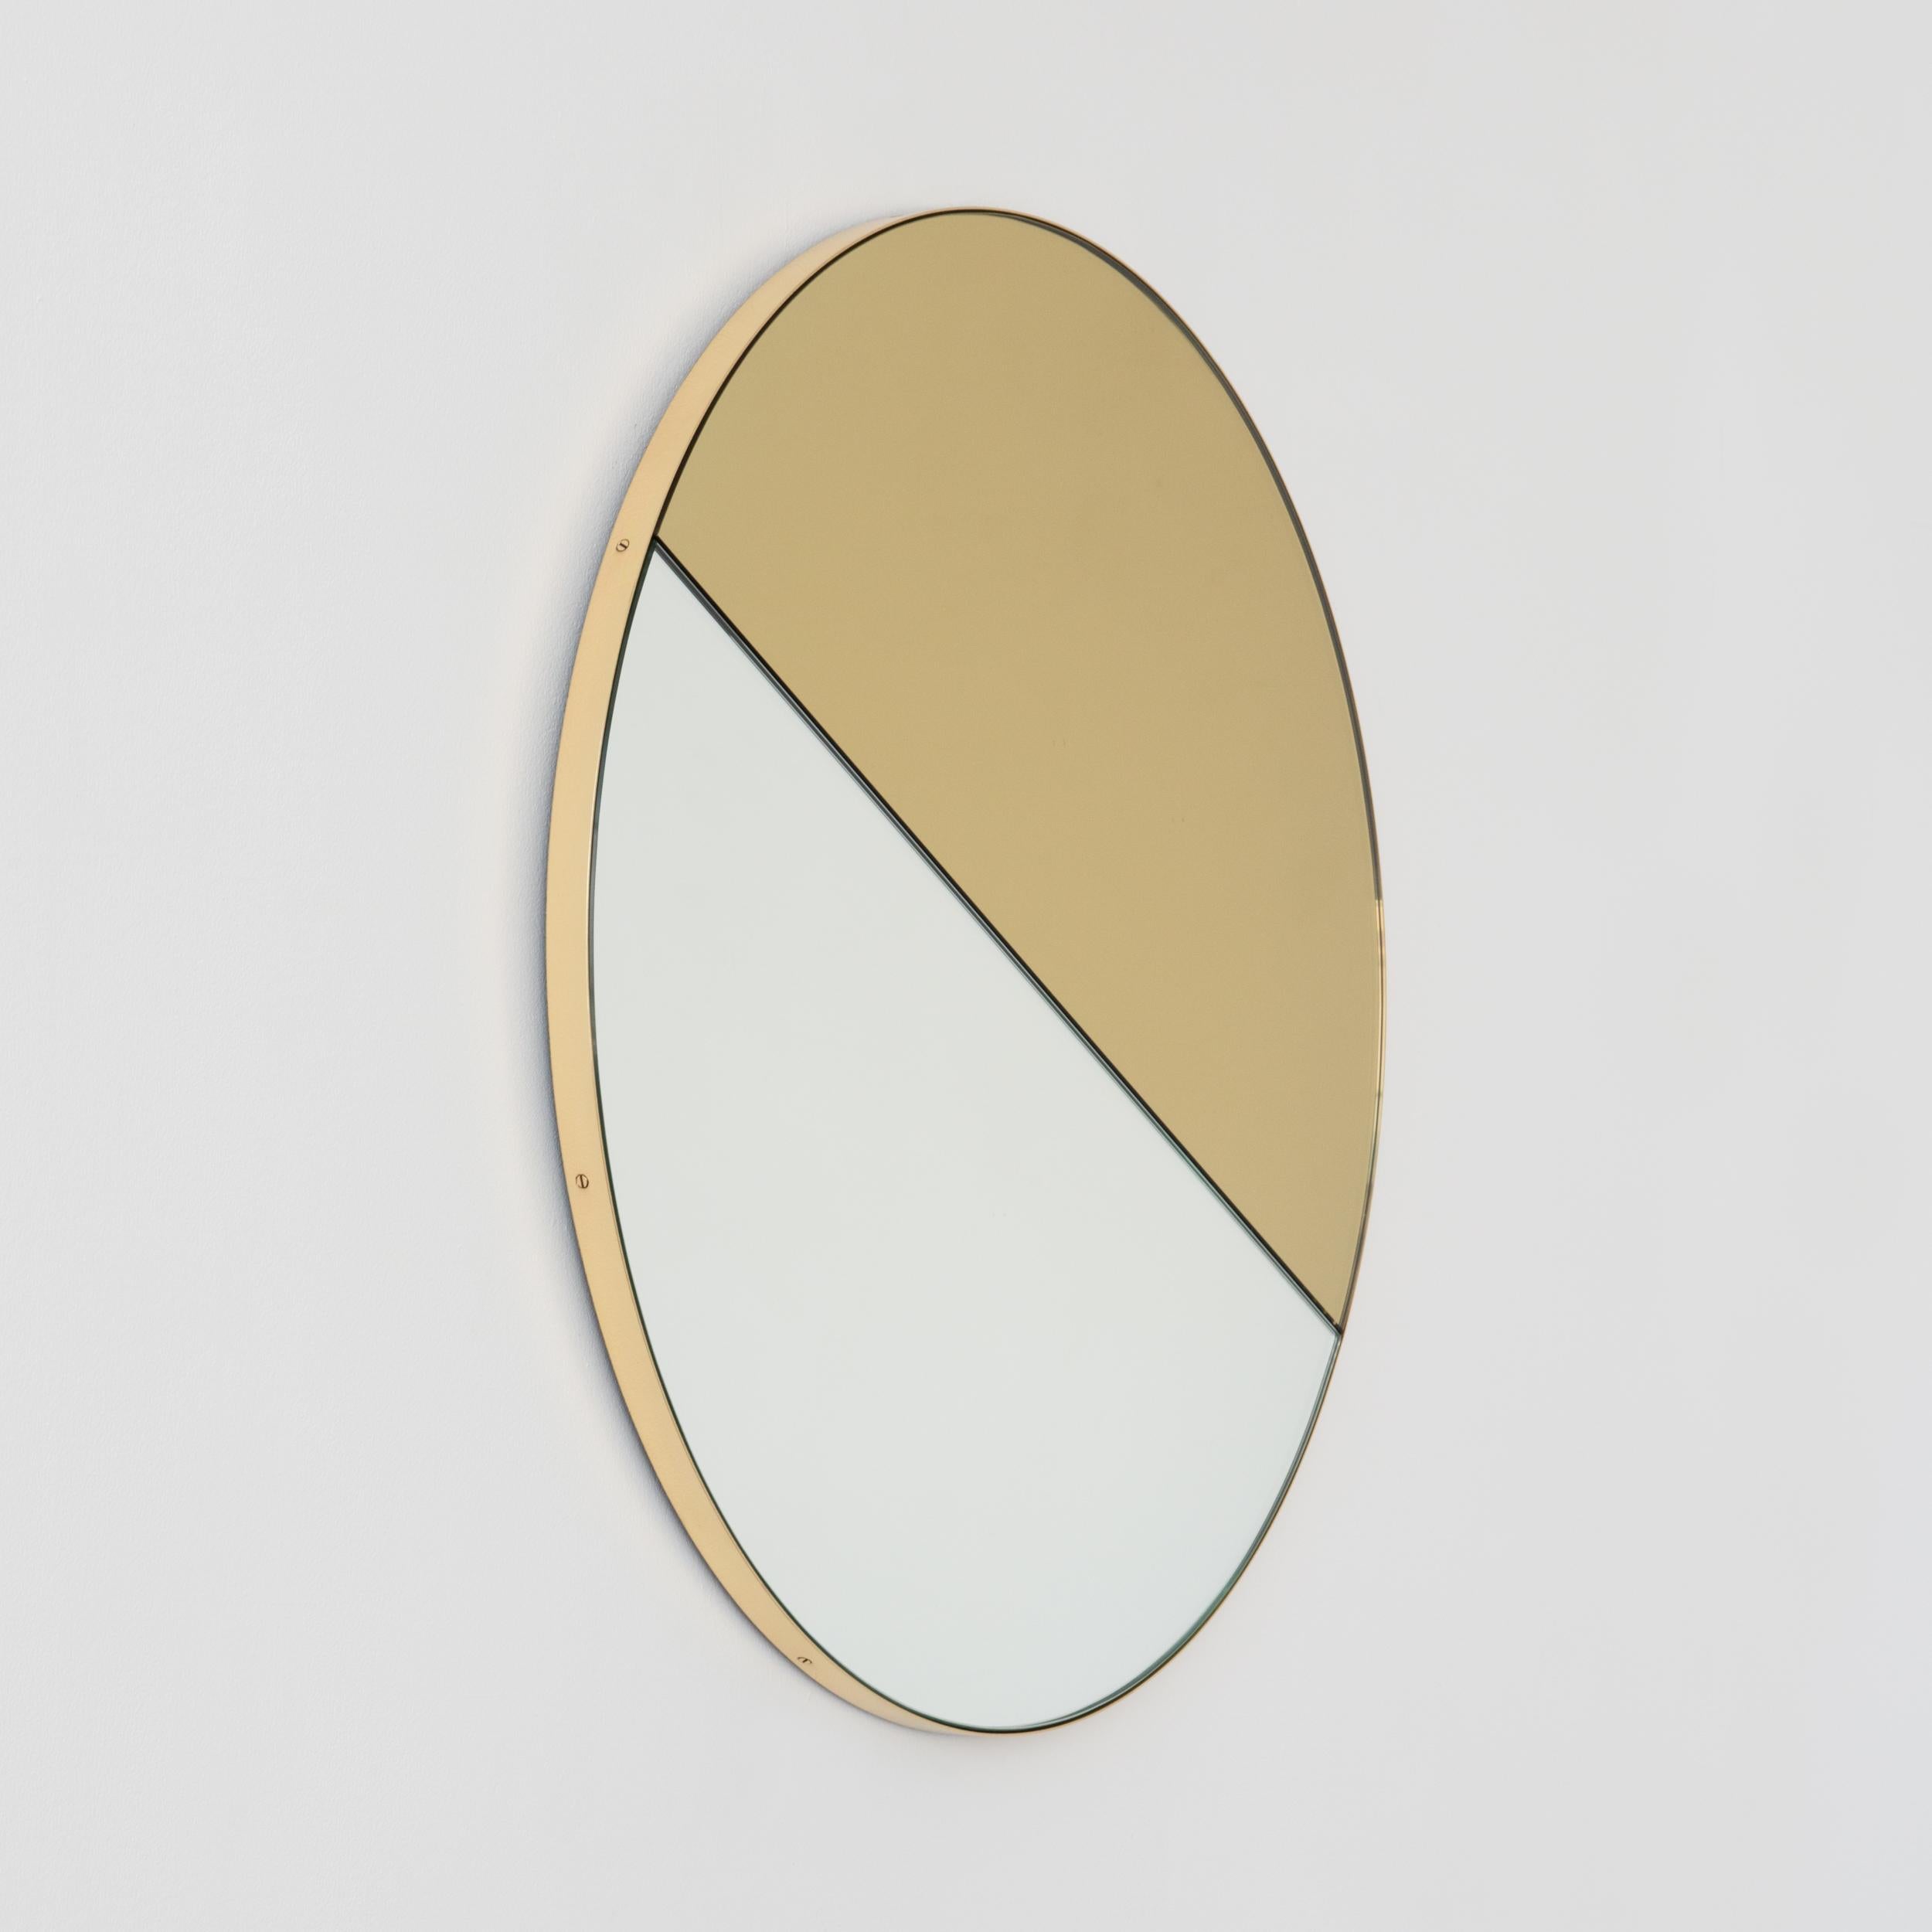 Delightful handcrafted mixed tinted gold and silver Orbis Dualis mirror with an elegant solid brushed brass frame. Supplied fully fitted with a specialist hanging system that allows the mirror to be hung in four different positions. Designed and